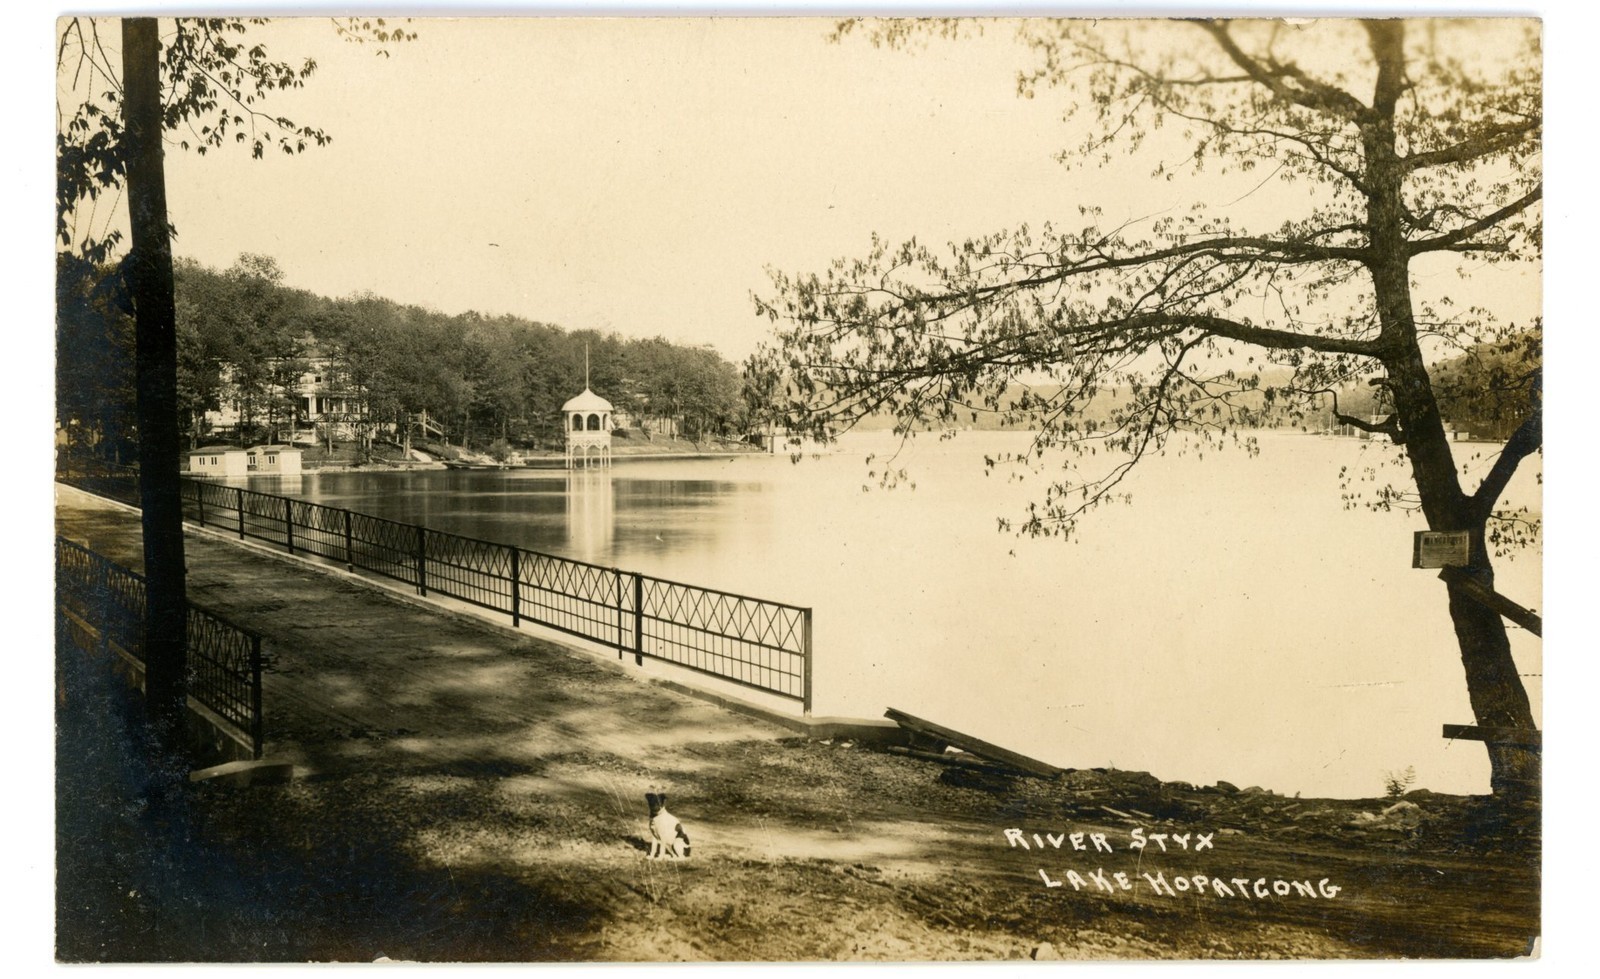 Lake Hopatcong - View on The River Styx - c 1910